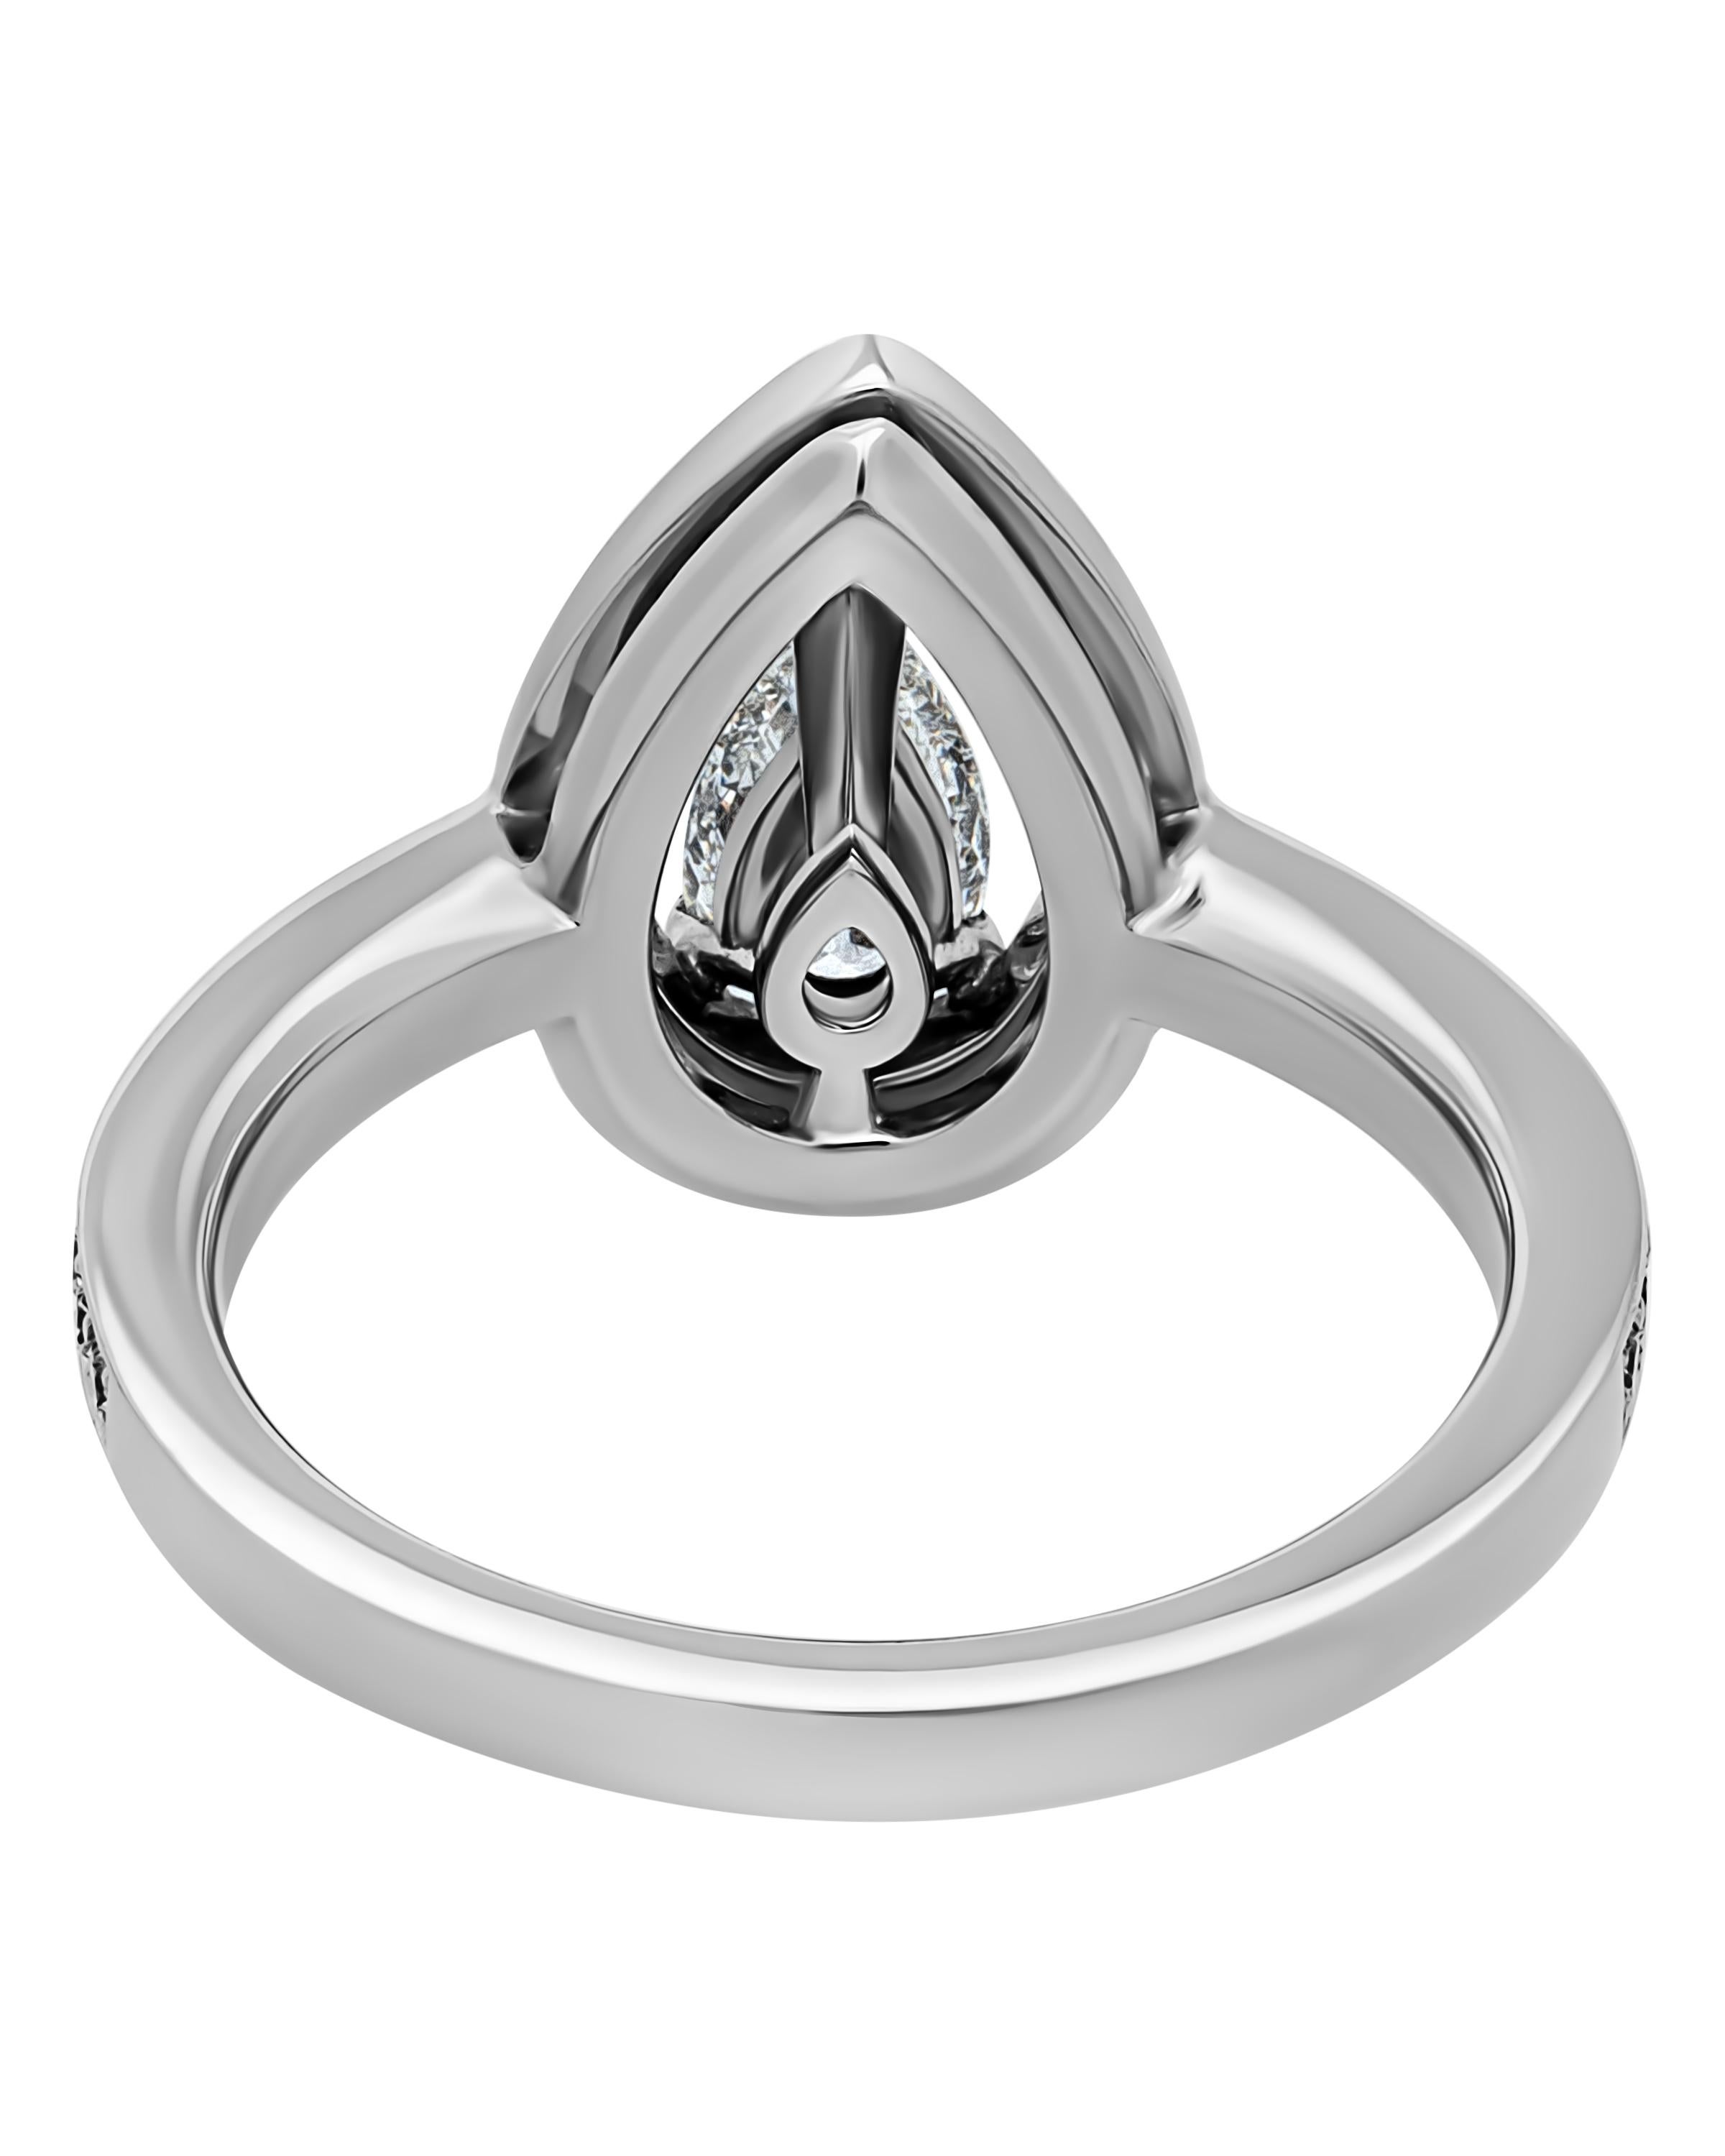 Contemporary FRED Lovelight Platinum Pear Cut Center Diamond Engagement Ring sz 5.75 For Sale